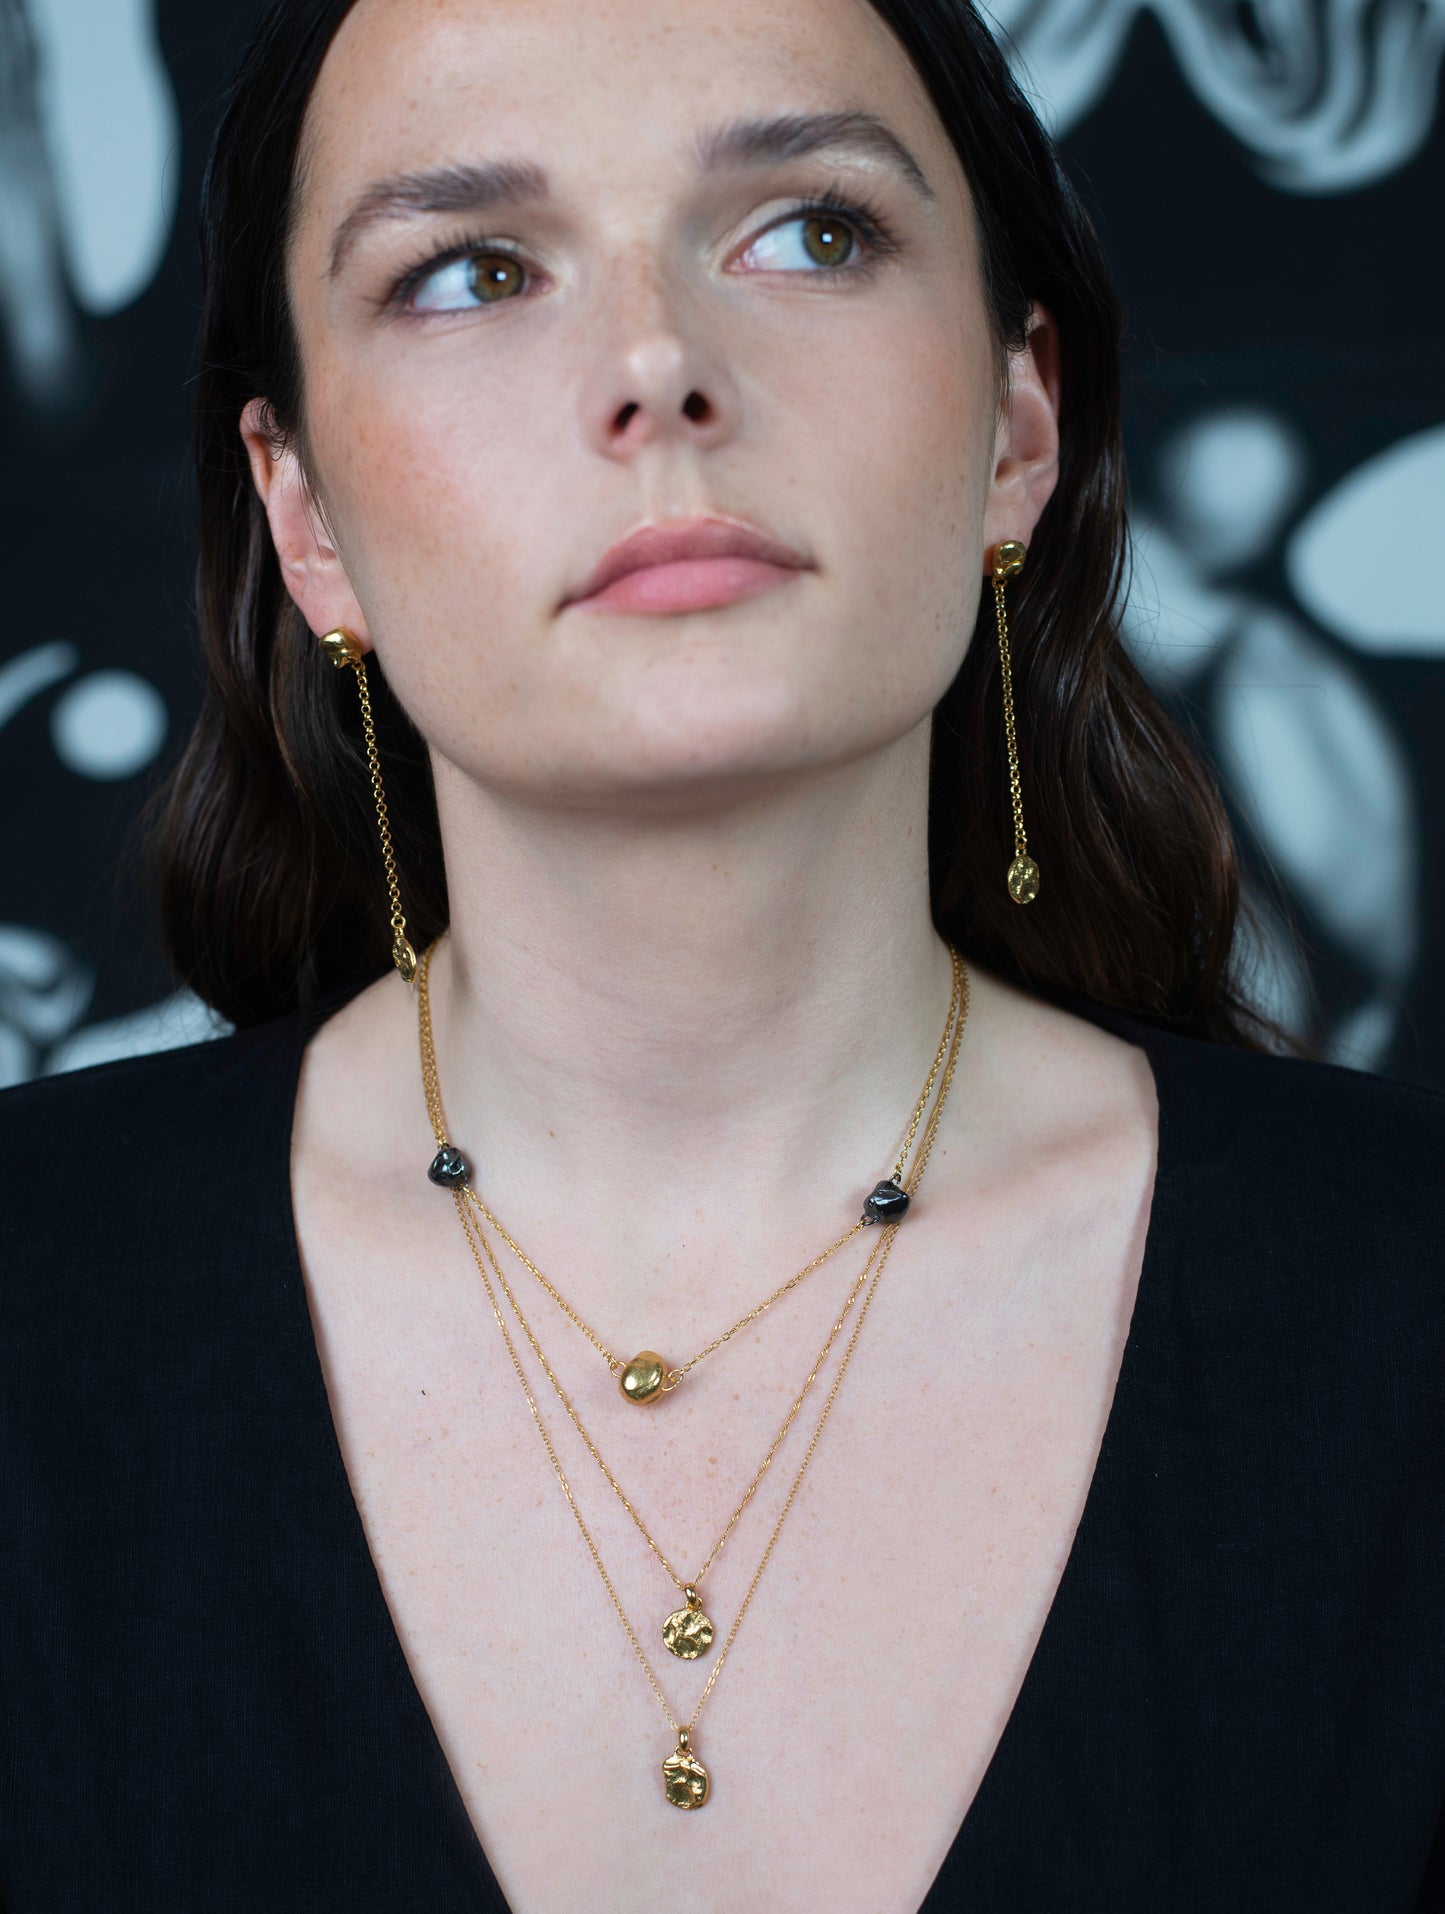 Model in layered gold necklaces and drop earrings